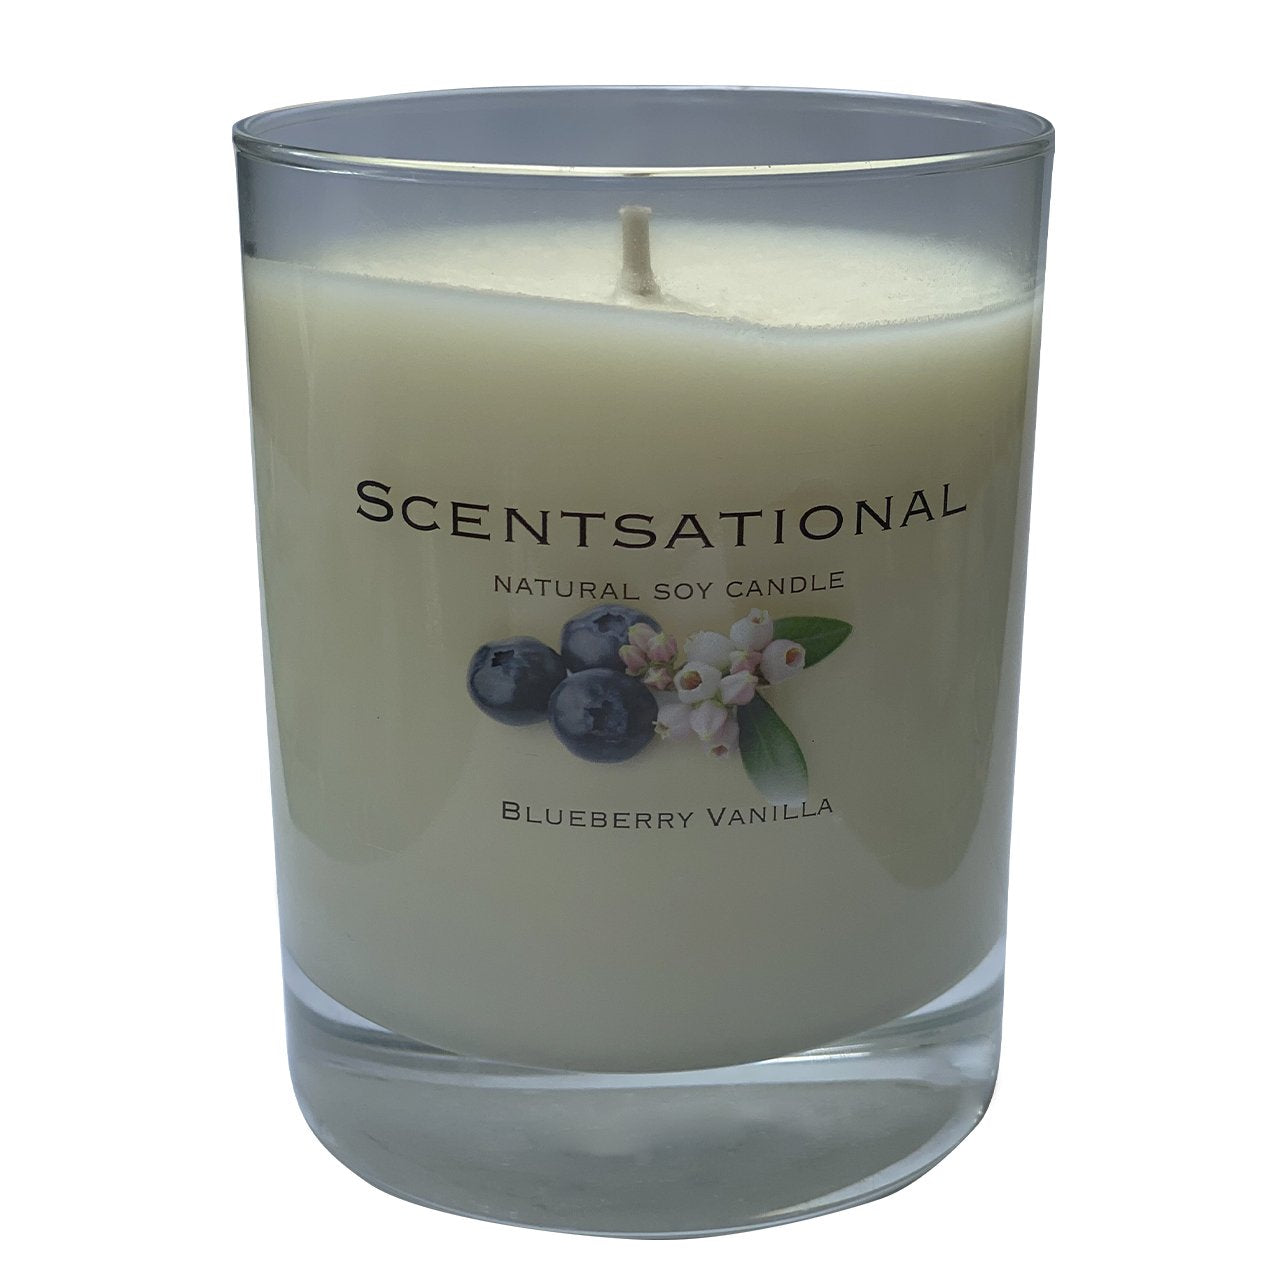 Scented Soy Candles BLUEBERRY VANILLA (11 oz) eliminates smoke, household and pet odors.